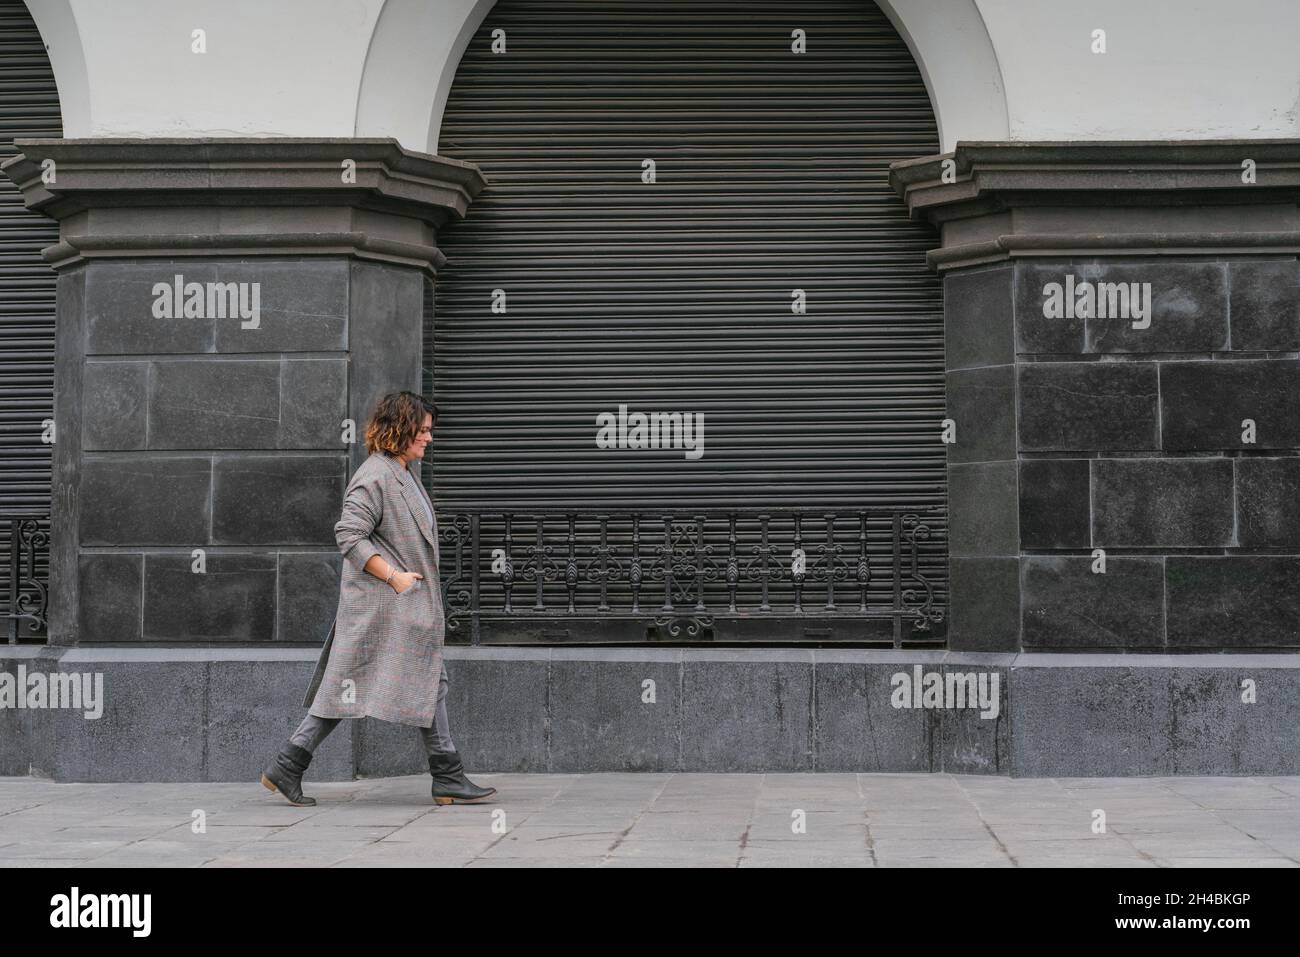 A woman walks down an old street looking down at the floor and has her hands inside her long coat, against a background of old grayscale architecture. Stock Photo